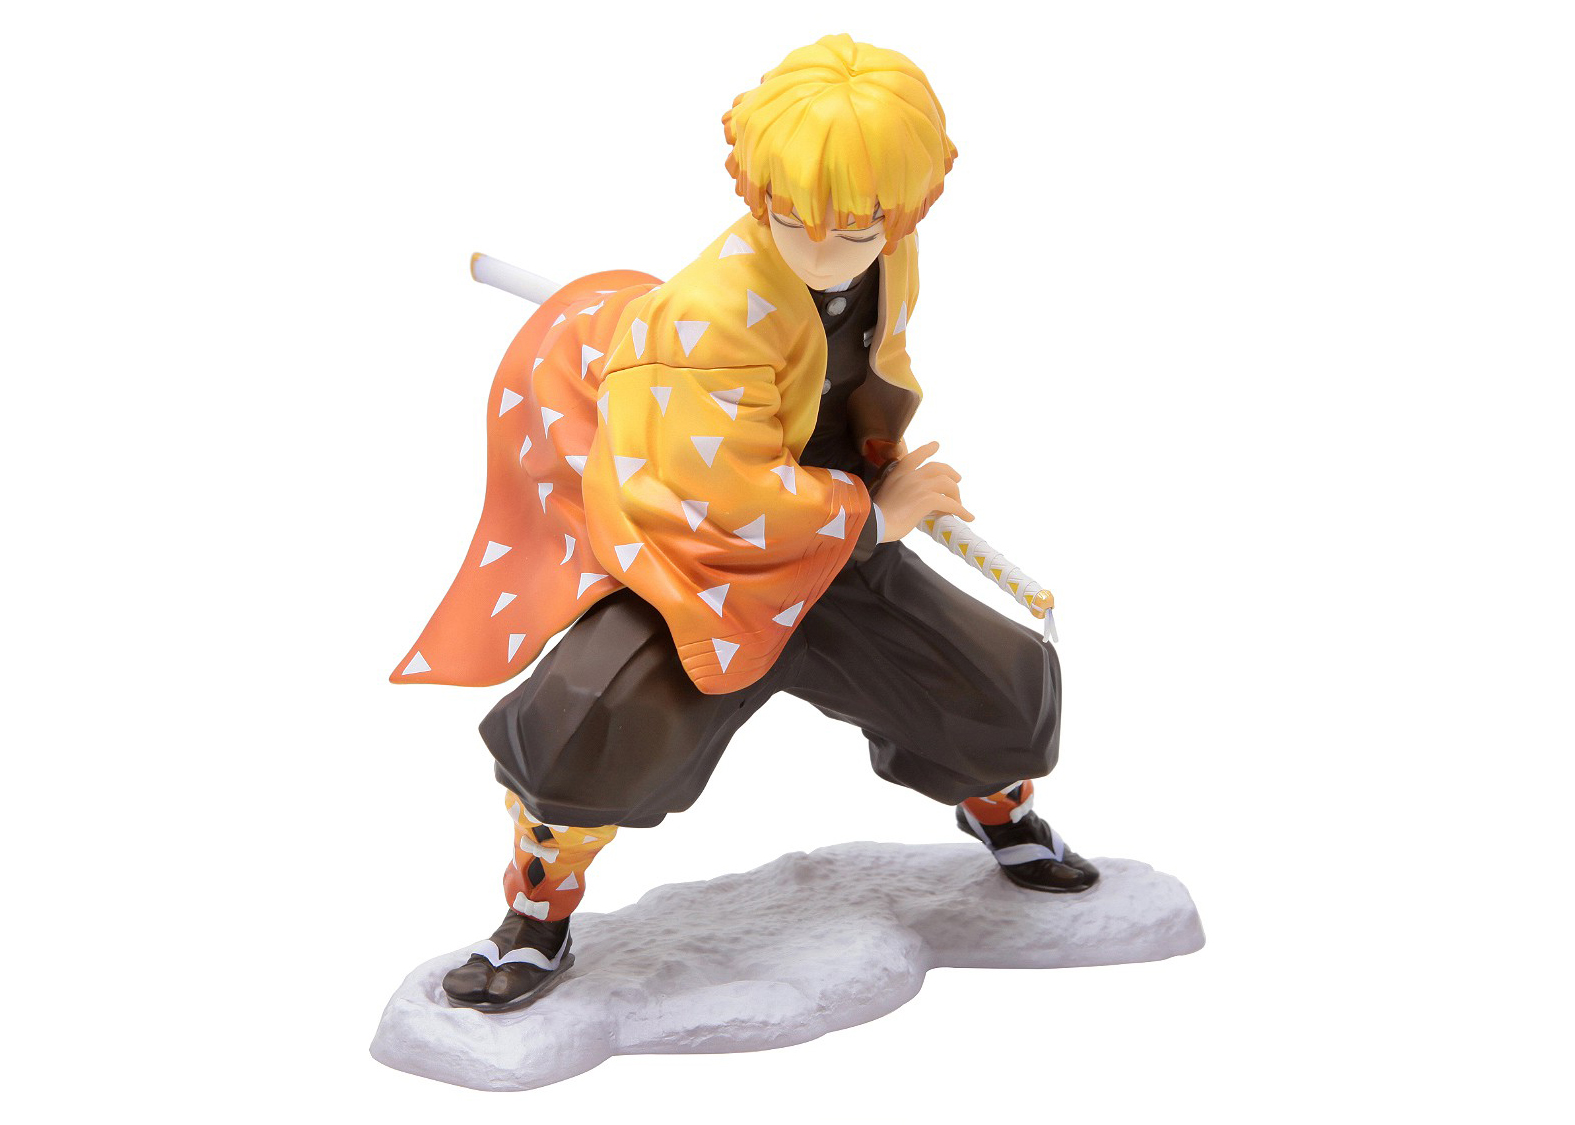 Buy RVM Toys Anime Demon Slayer Action Figure Set of 6 Size 16CM Toy for  Decoration Car Dashboard Cake Topper Office Desk  Study Table Collector  Figures Multicolor Online at Low Prices